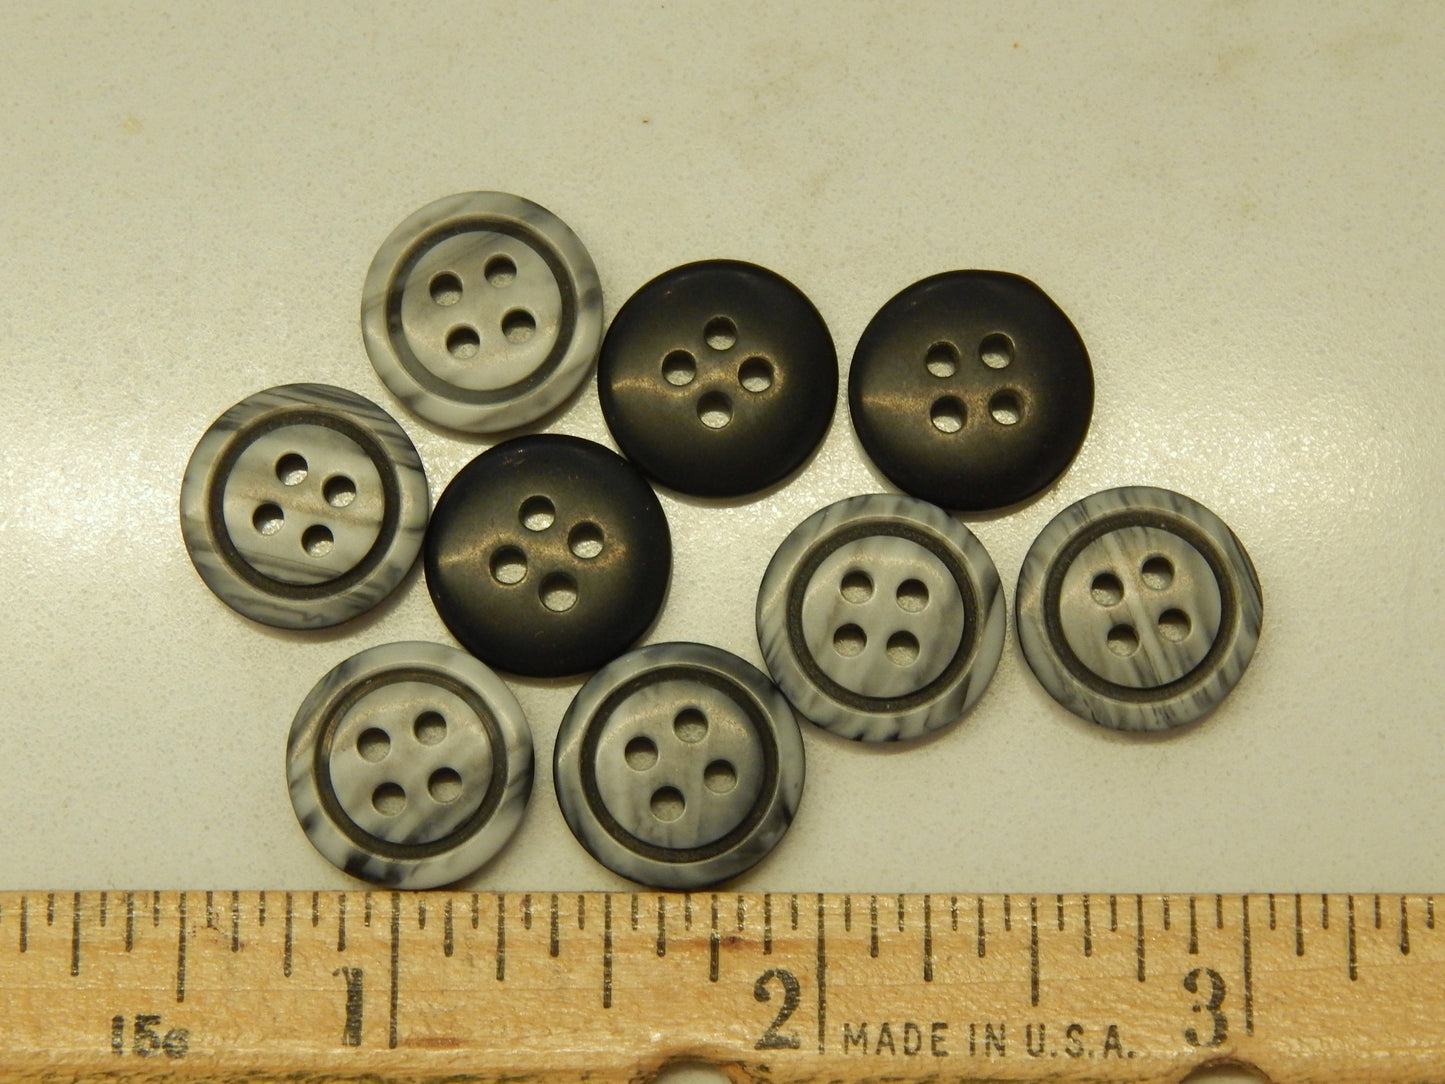 Gray Marbled Buttons